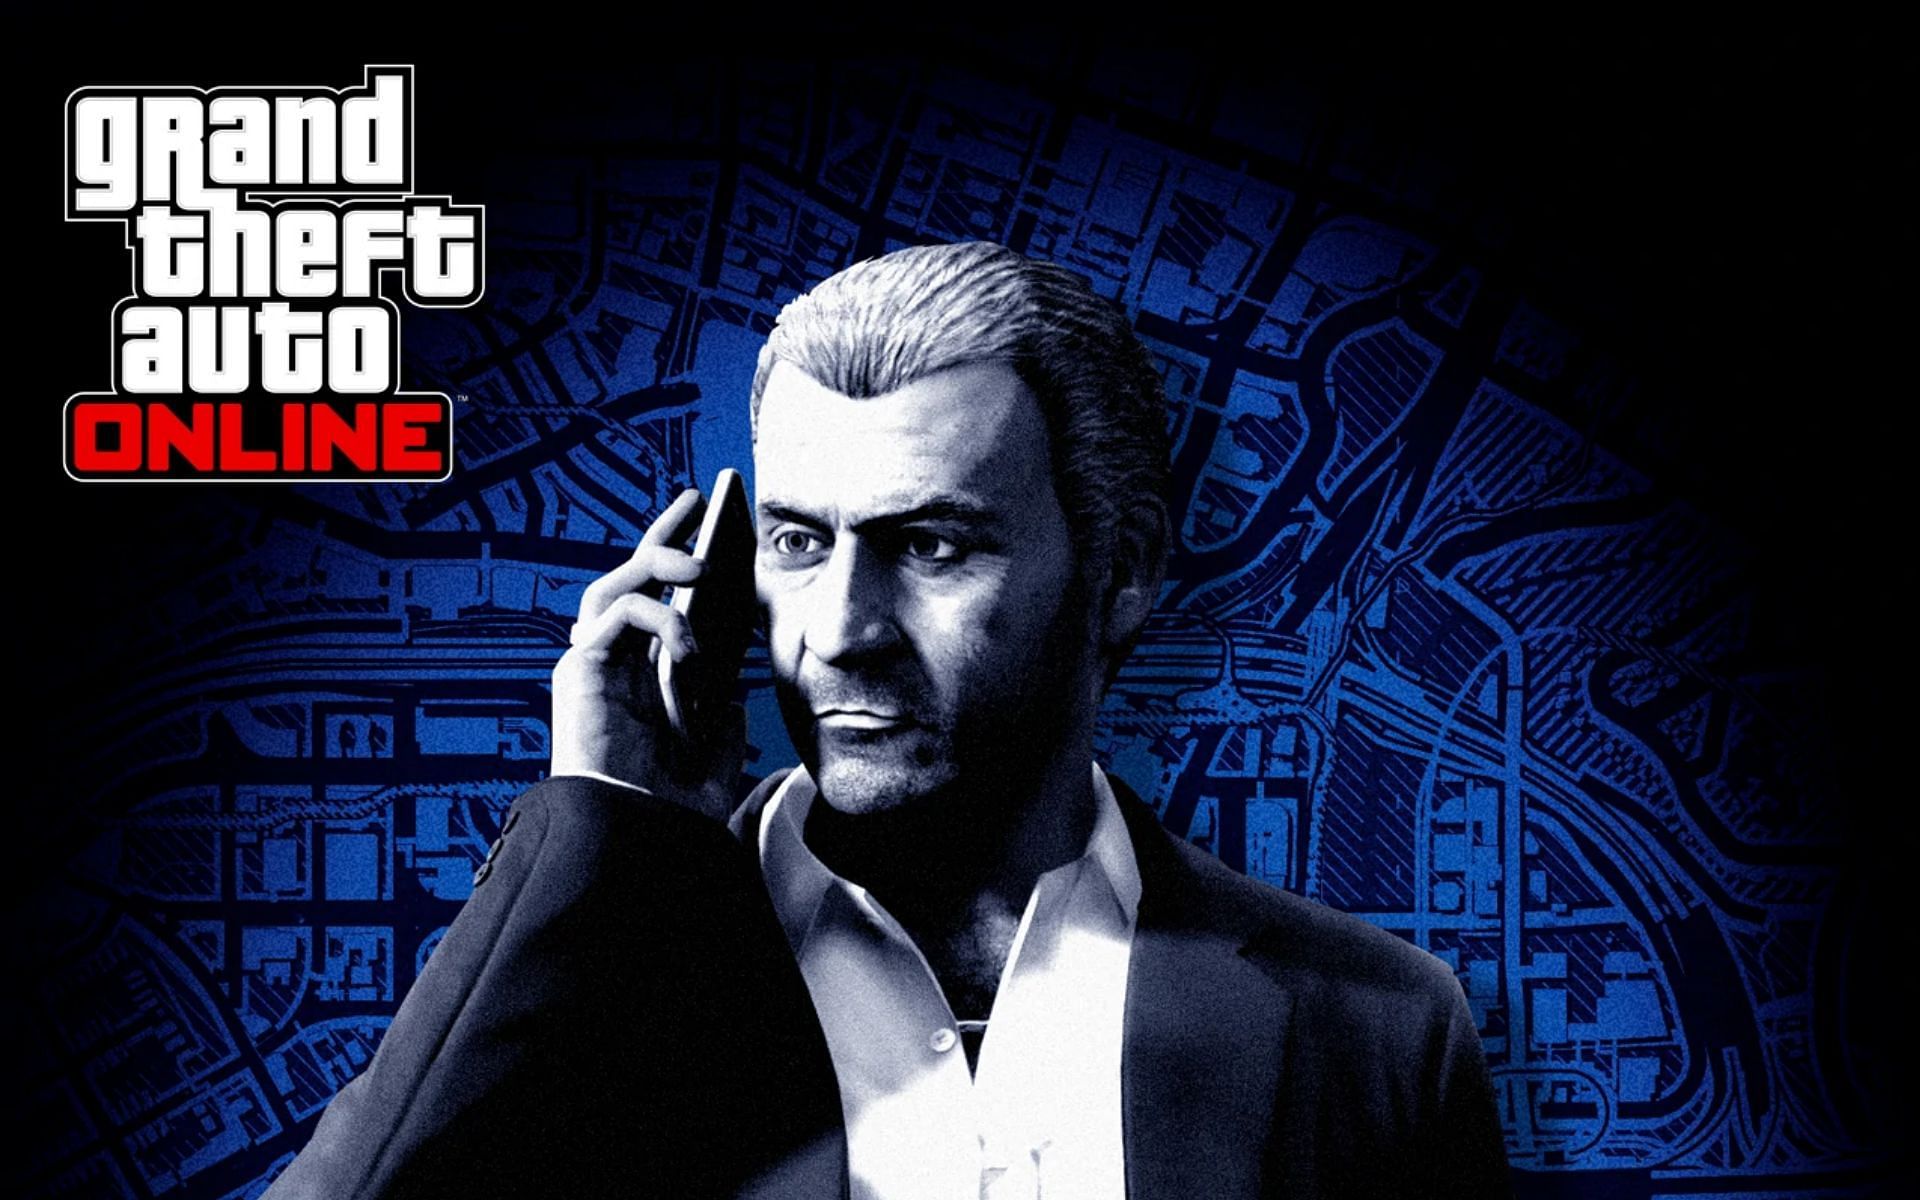 GTA Online players likely got a mission text from him before (Image via Rockstar Games)